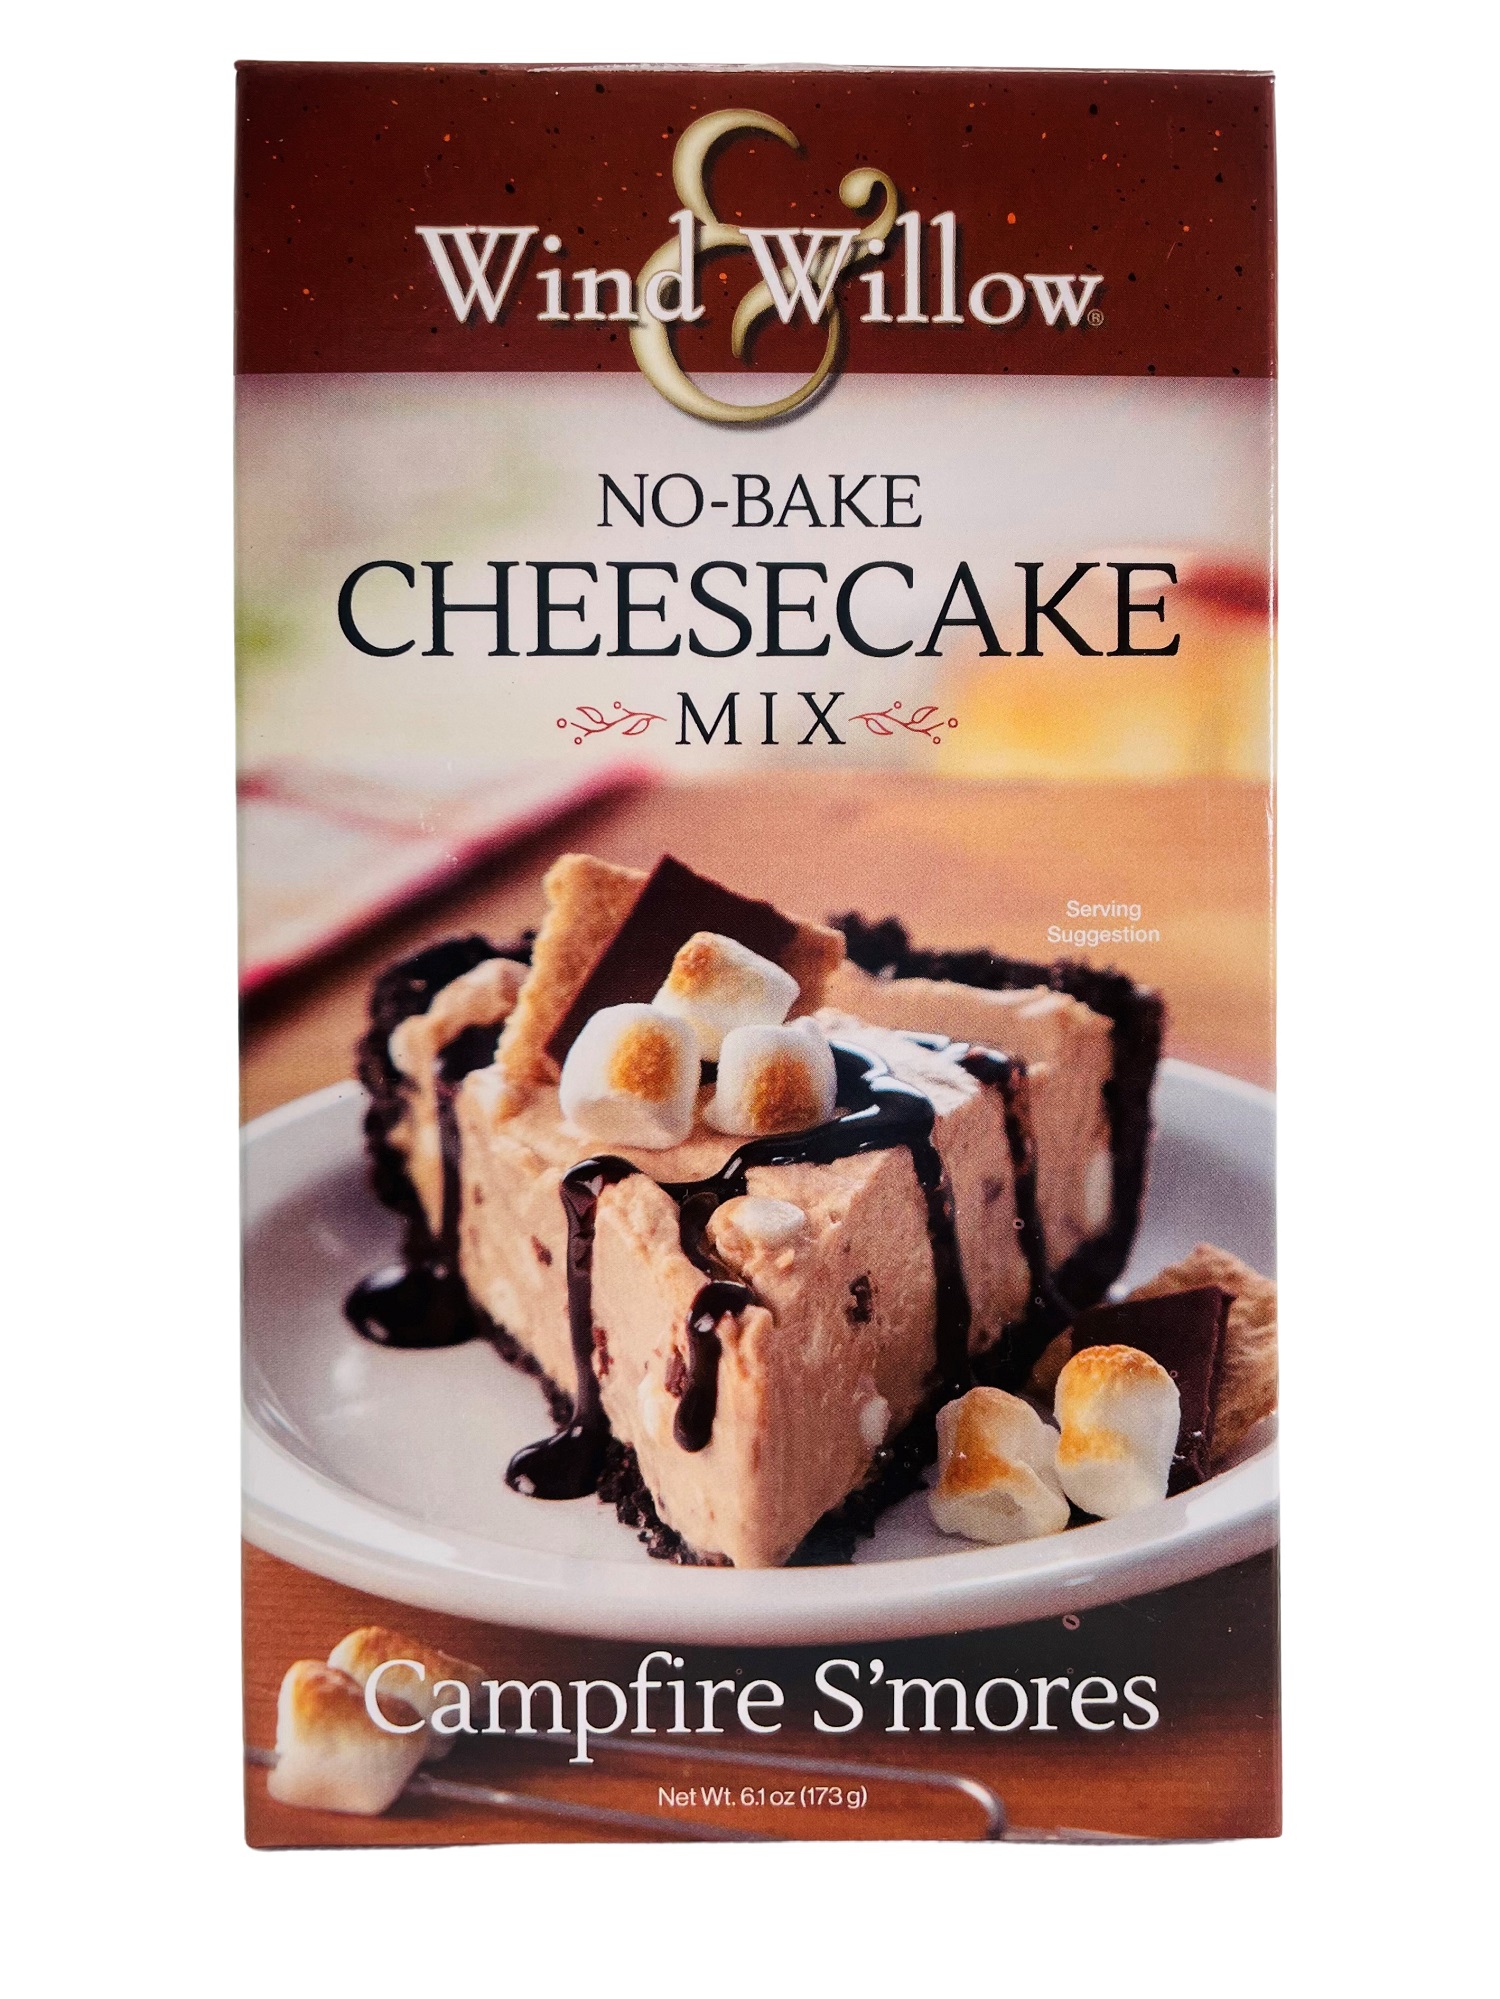 Wind & Willow Campfire S'mores No-Bake Cheesecake Mix